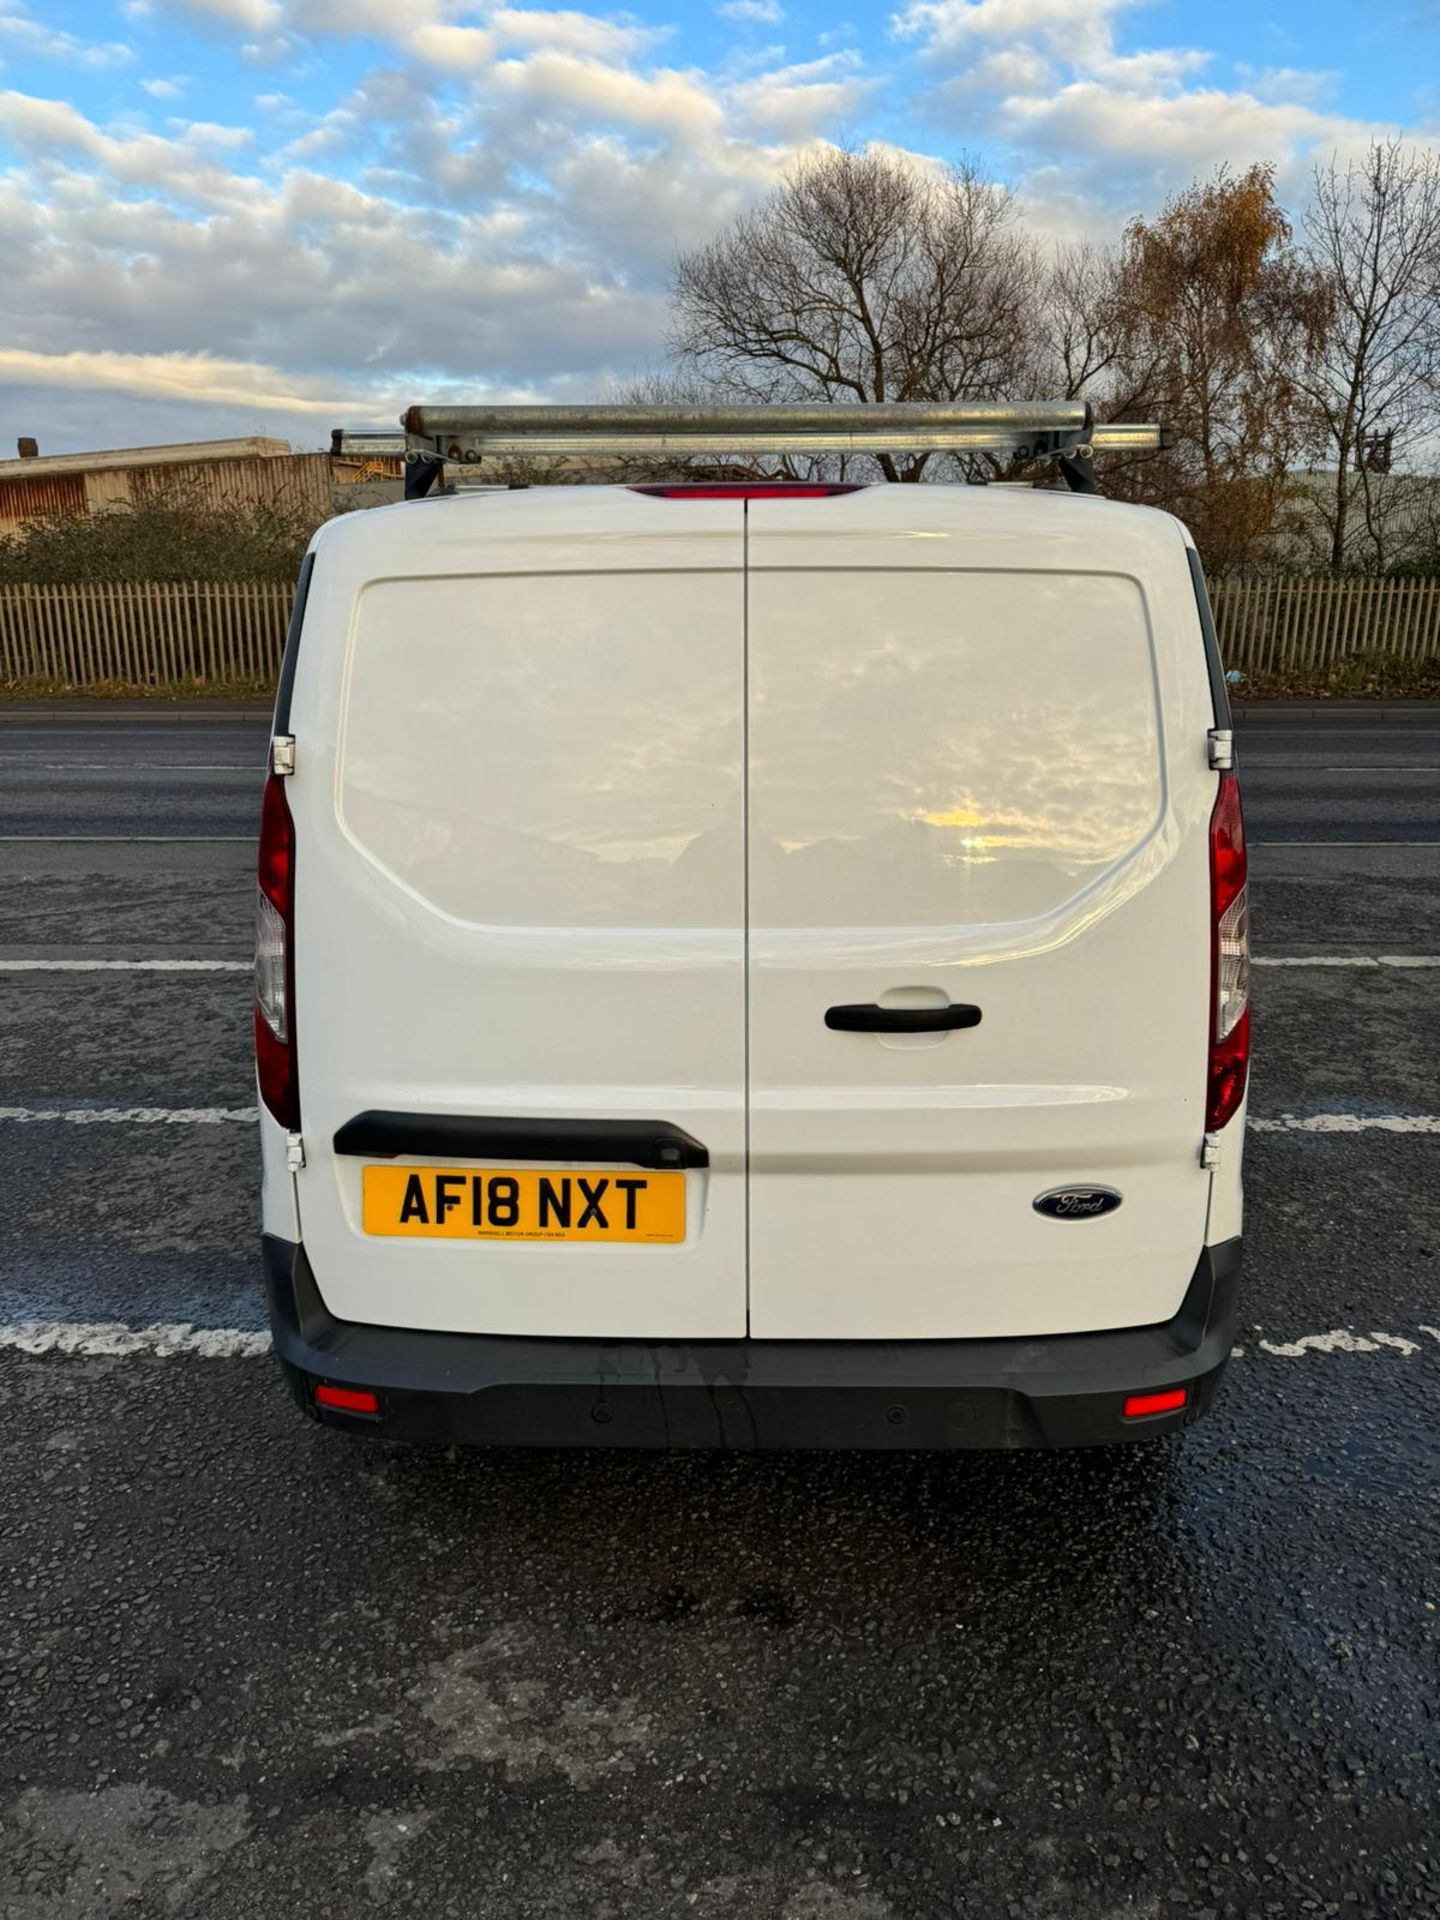 2018 18 FORD TRANSIT CONNECT TREND PAENL VAN - 128K MILES - EURO 6 - 3 SEATS - LWB - ROOF RACK. - Image 3 of 11